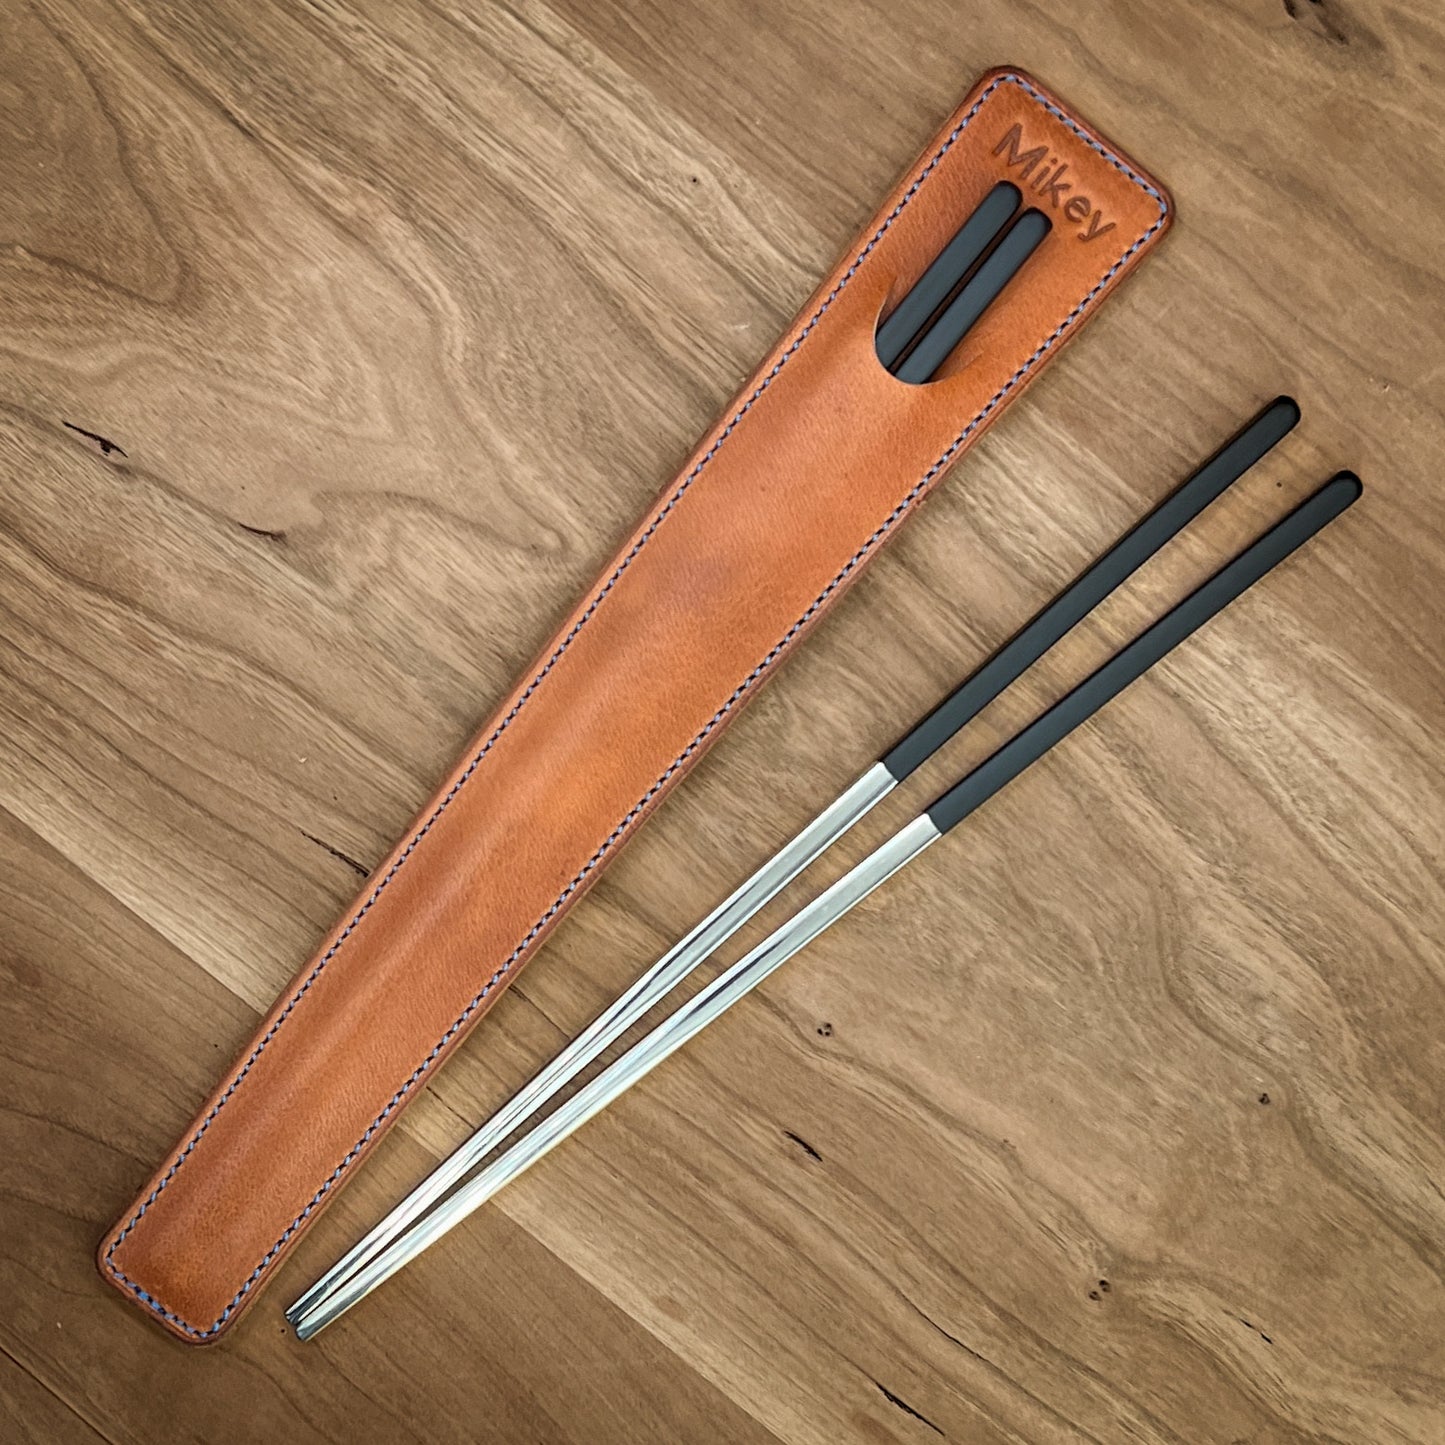 Personalized chop sticks case.  handmade in Horween leather by custom leather and pen in houston, texas.